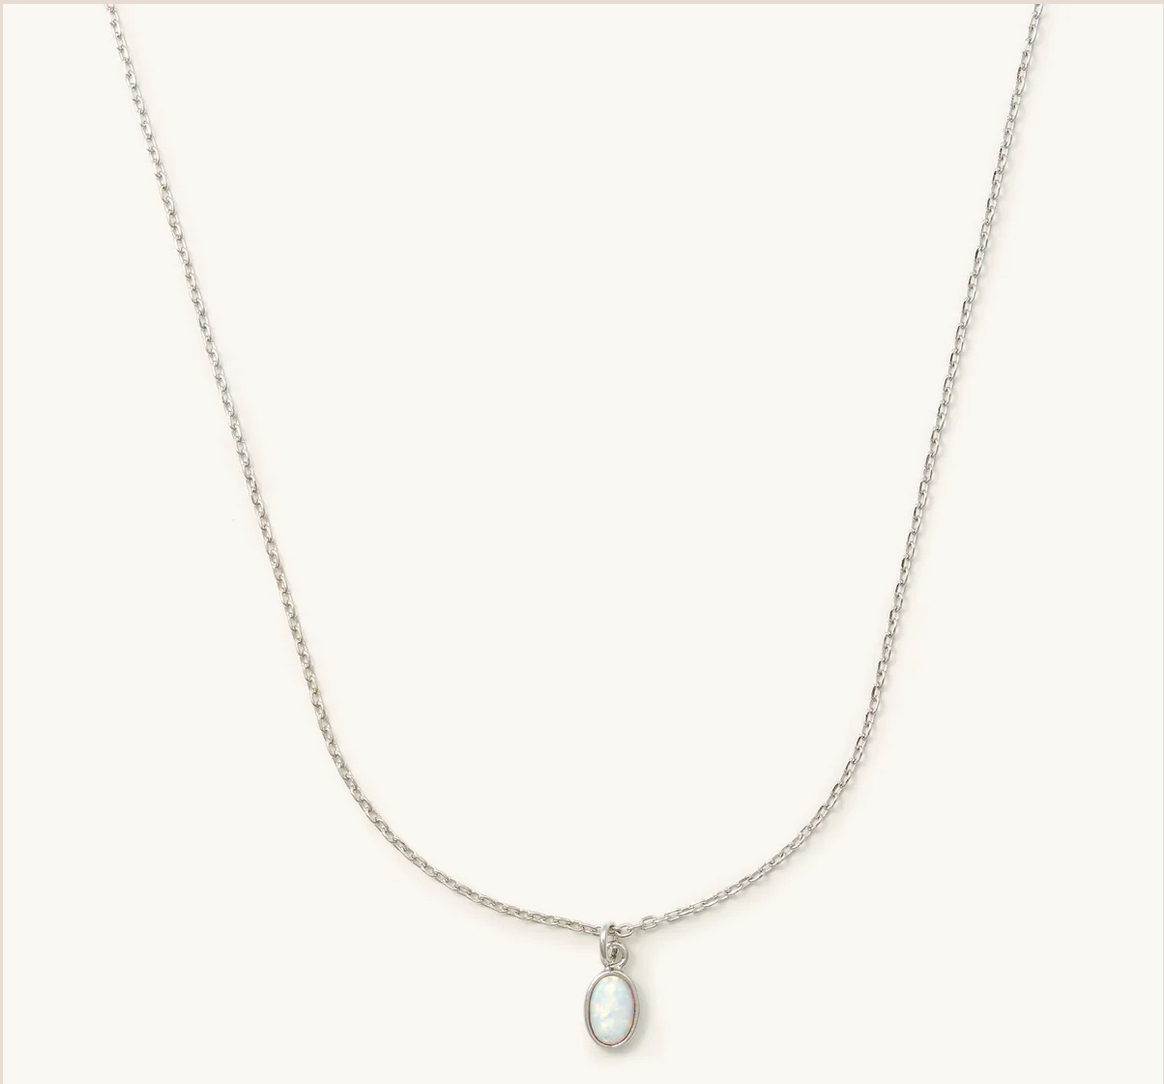 NS Opal Necklace - Sterling Silver